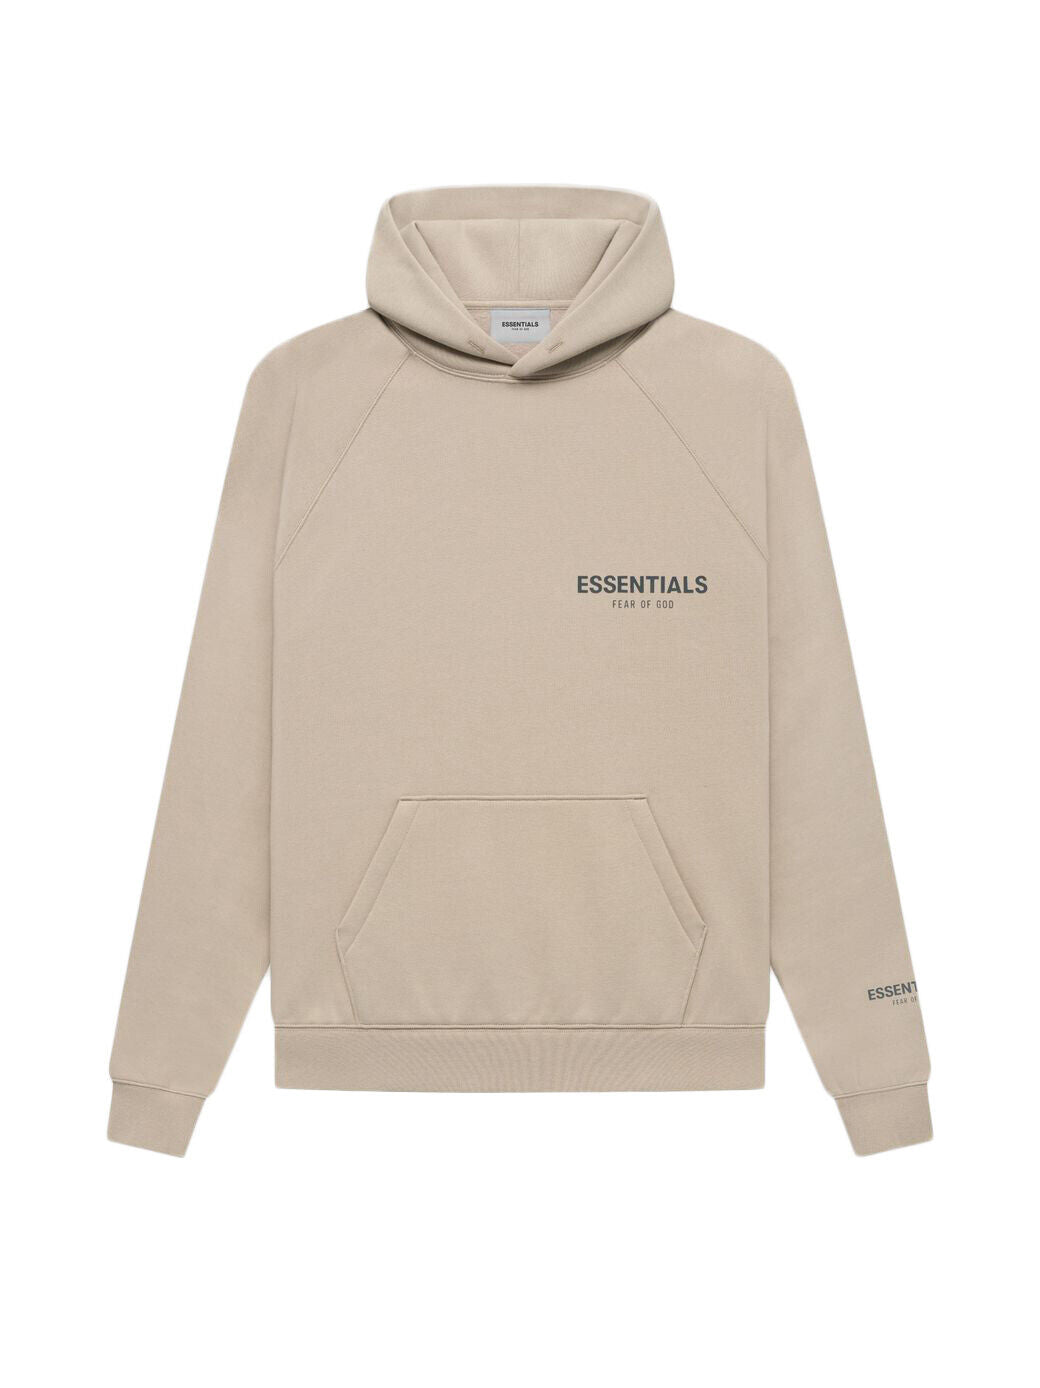 Fear of God Essentials Core Collection Pullover Hoodie Tan Size Large